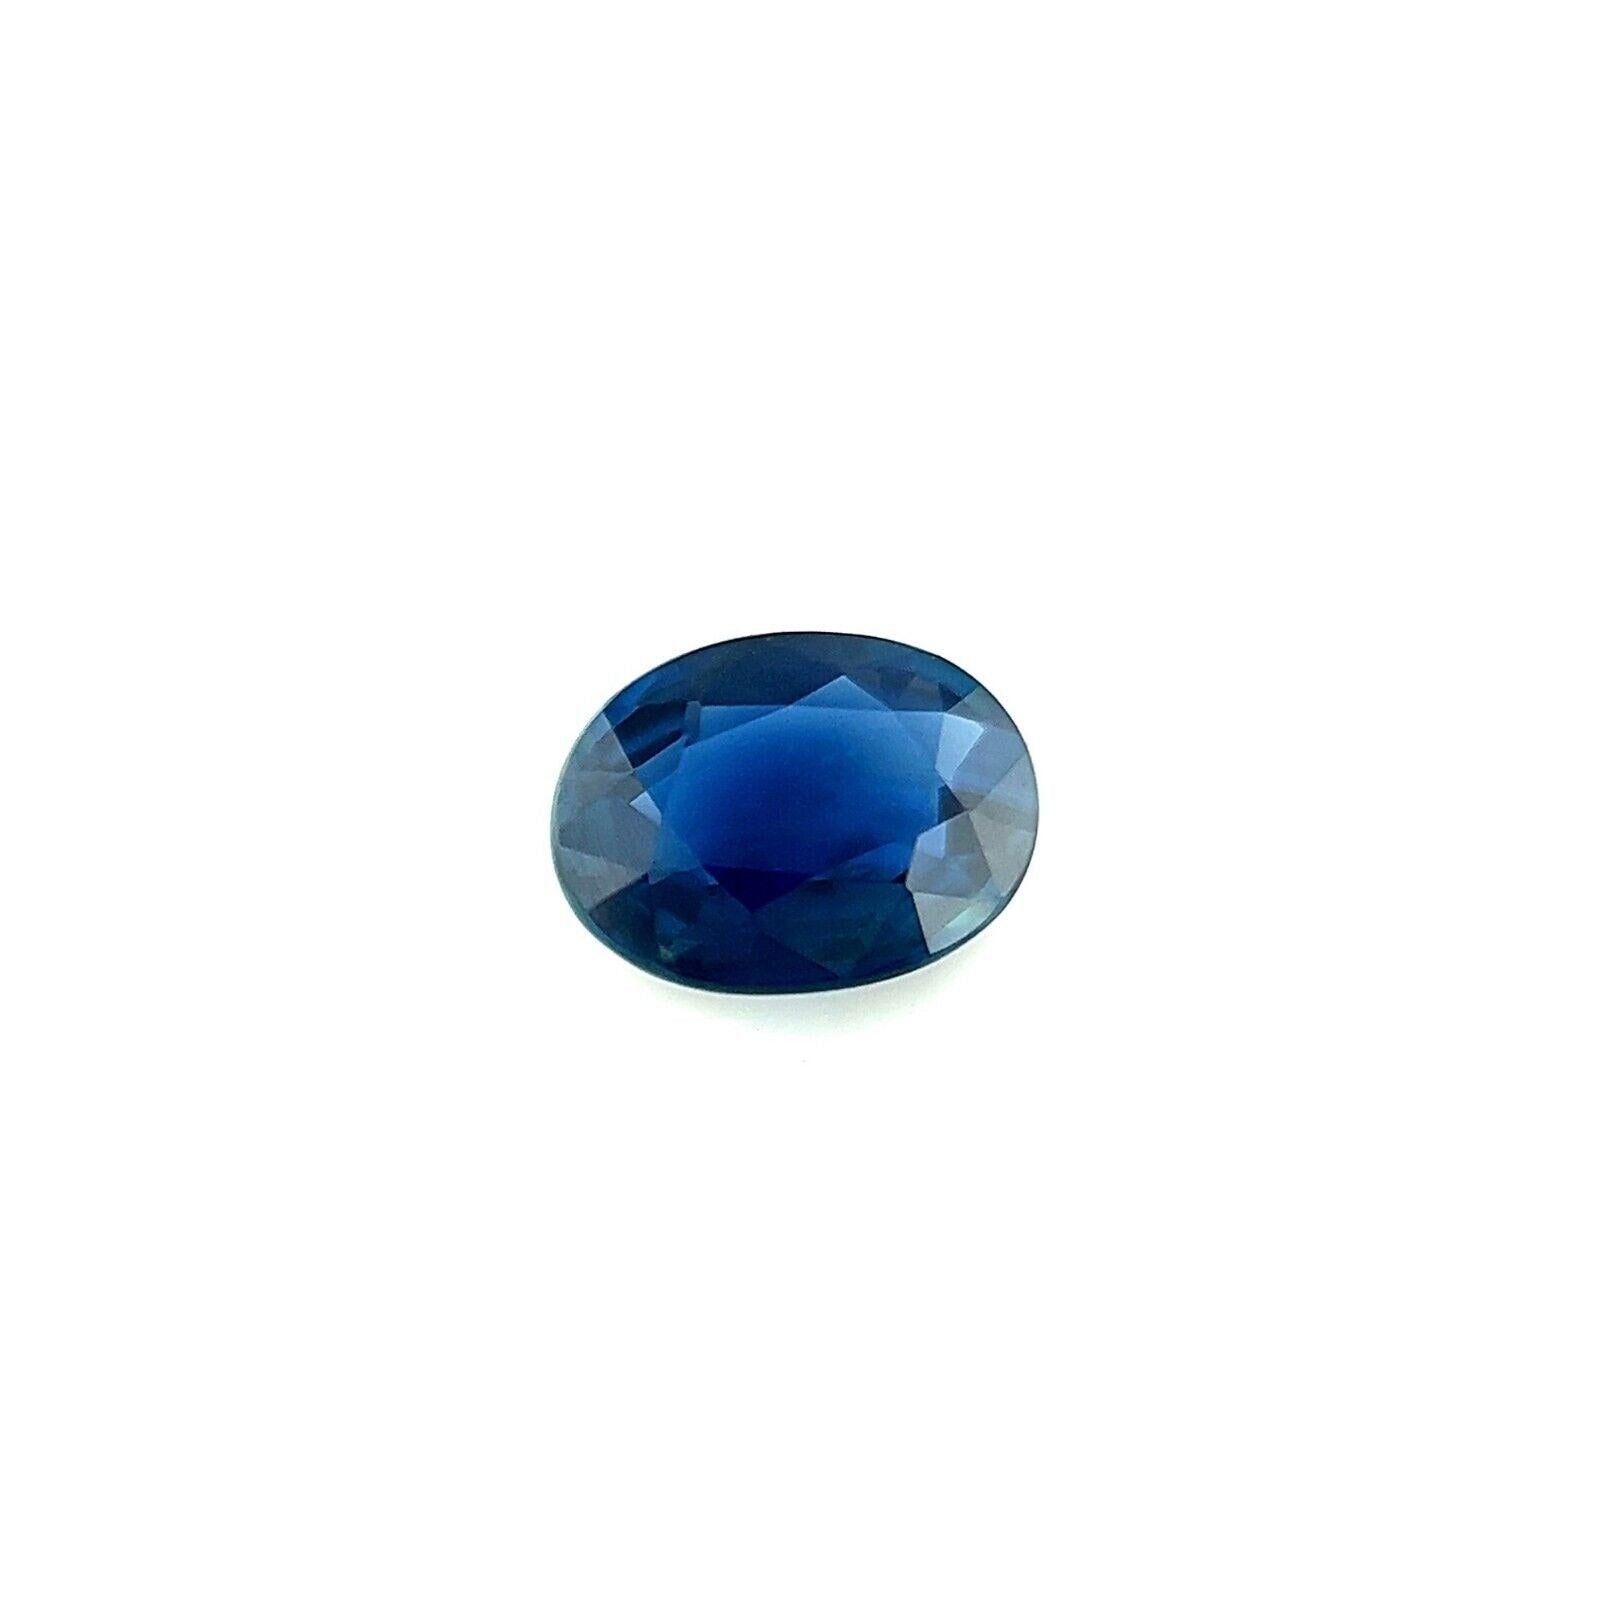 Natural 0.66ct Deep Blue Sapphire Oval Cut Rare 6x4.6mm Loose Gemstone VVS

Natural Deep Blue Sapphire Gemstone.
0.66 Carat sapphire with a beautiful deep blue colour.
Also has excellent clarity, a very clean stone with only some small natural